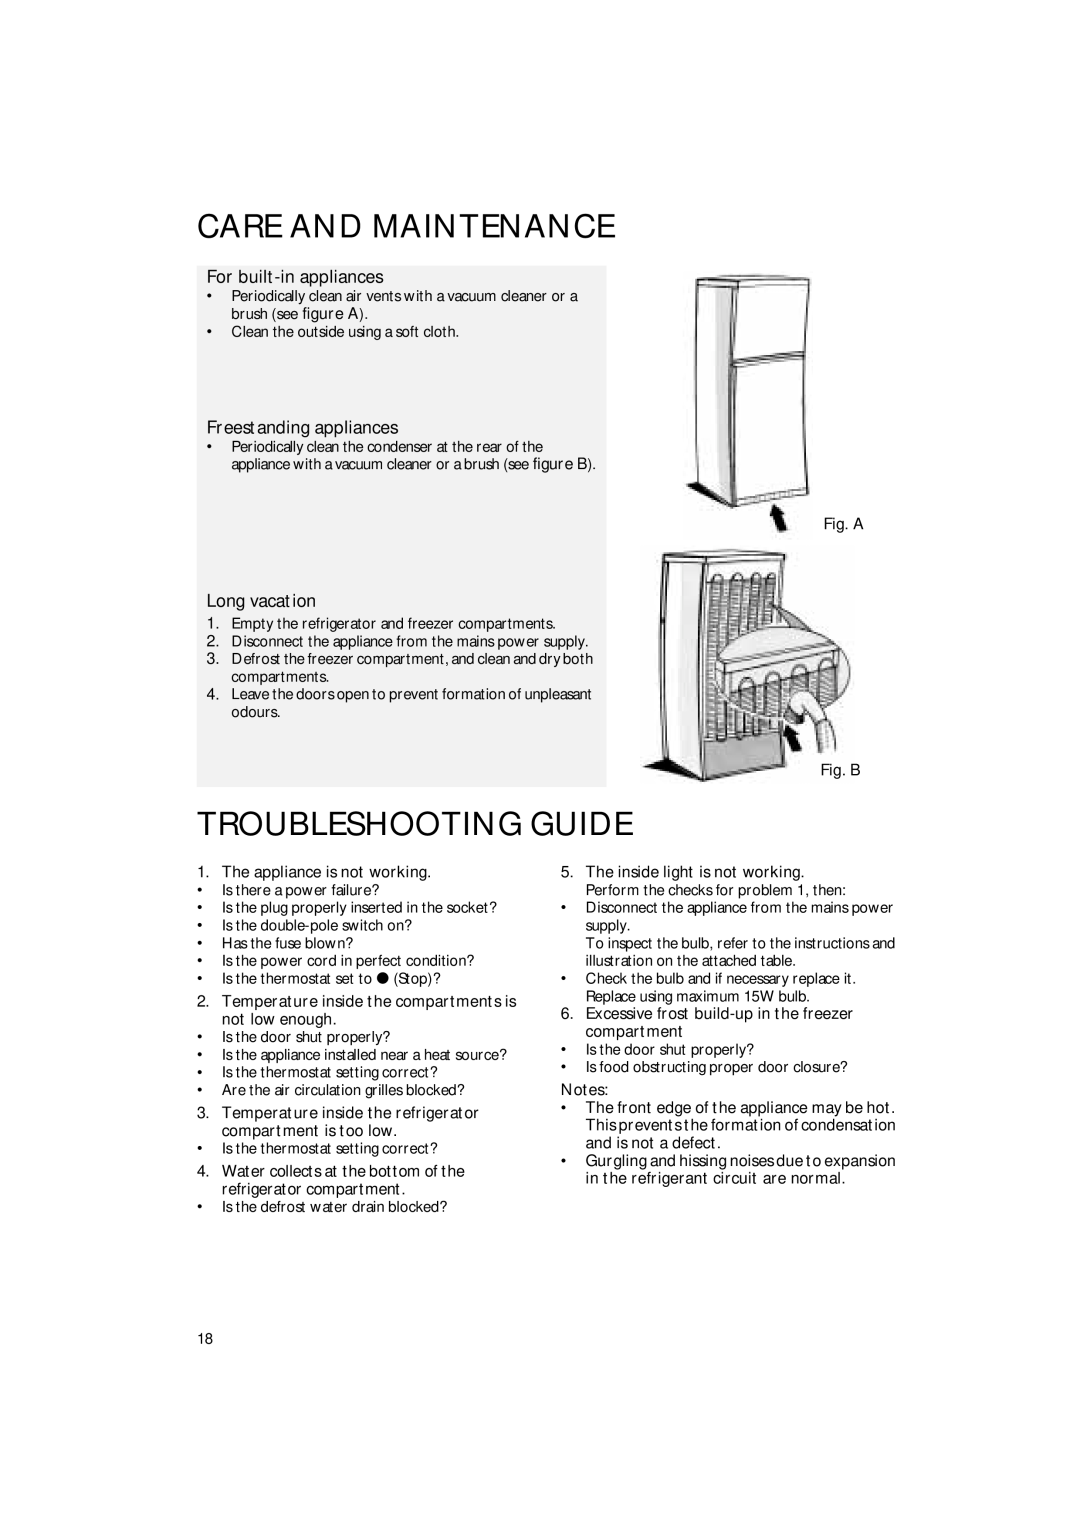 Smeg FR238APL Care And Maintenance, Troubleshooting Guide, For built-inappliances, Freestanding appliances, Long vacation 